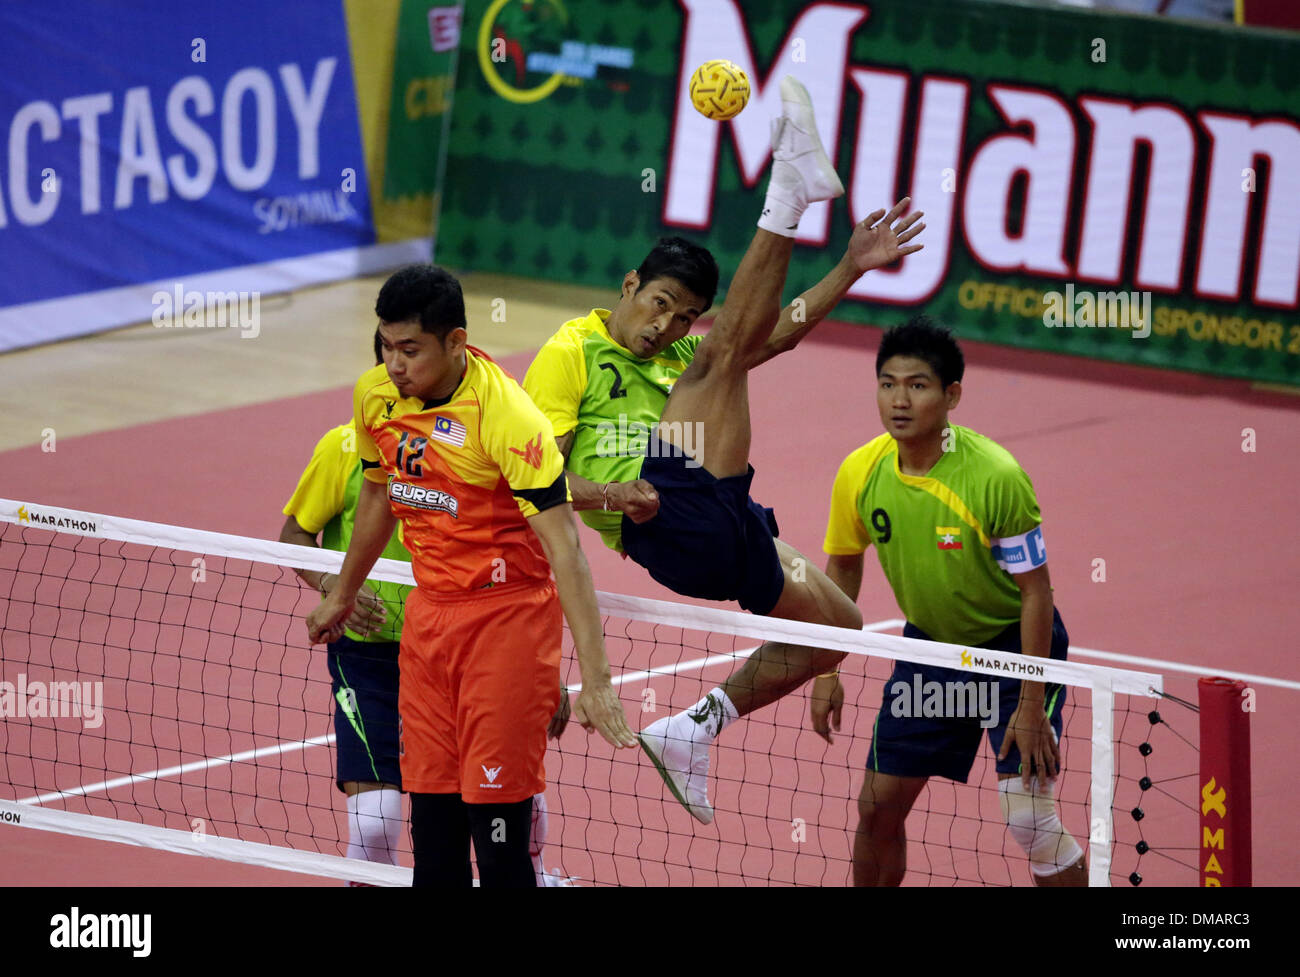 Nay Pyi Taw, Myanmar. 13th Dec, 2013. A player of Myanmar (2nd R) hits a shot during the men's Sepak Takraw match between Myanmar and Malaysia in the 27th Southeast Asian (SEA) Games in Nay Pyi Taw, Myanmar, Dec. 12, 2013. © U Aung/Xinhua/Alamy Live News Stock Photo